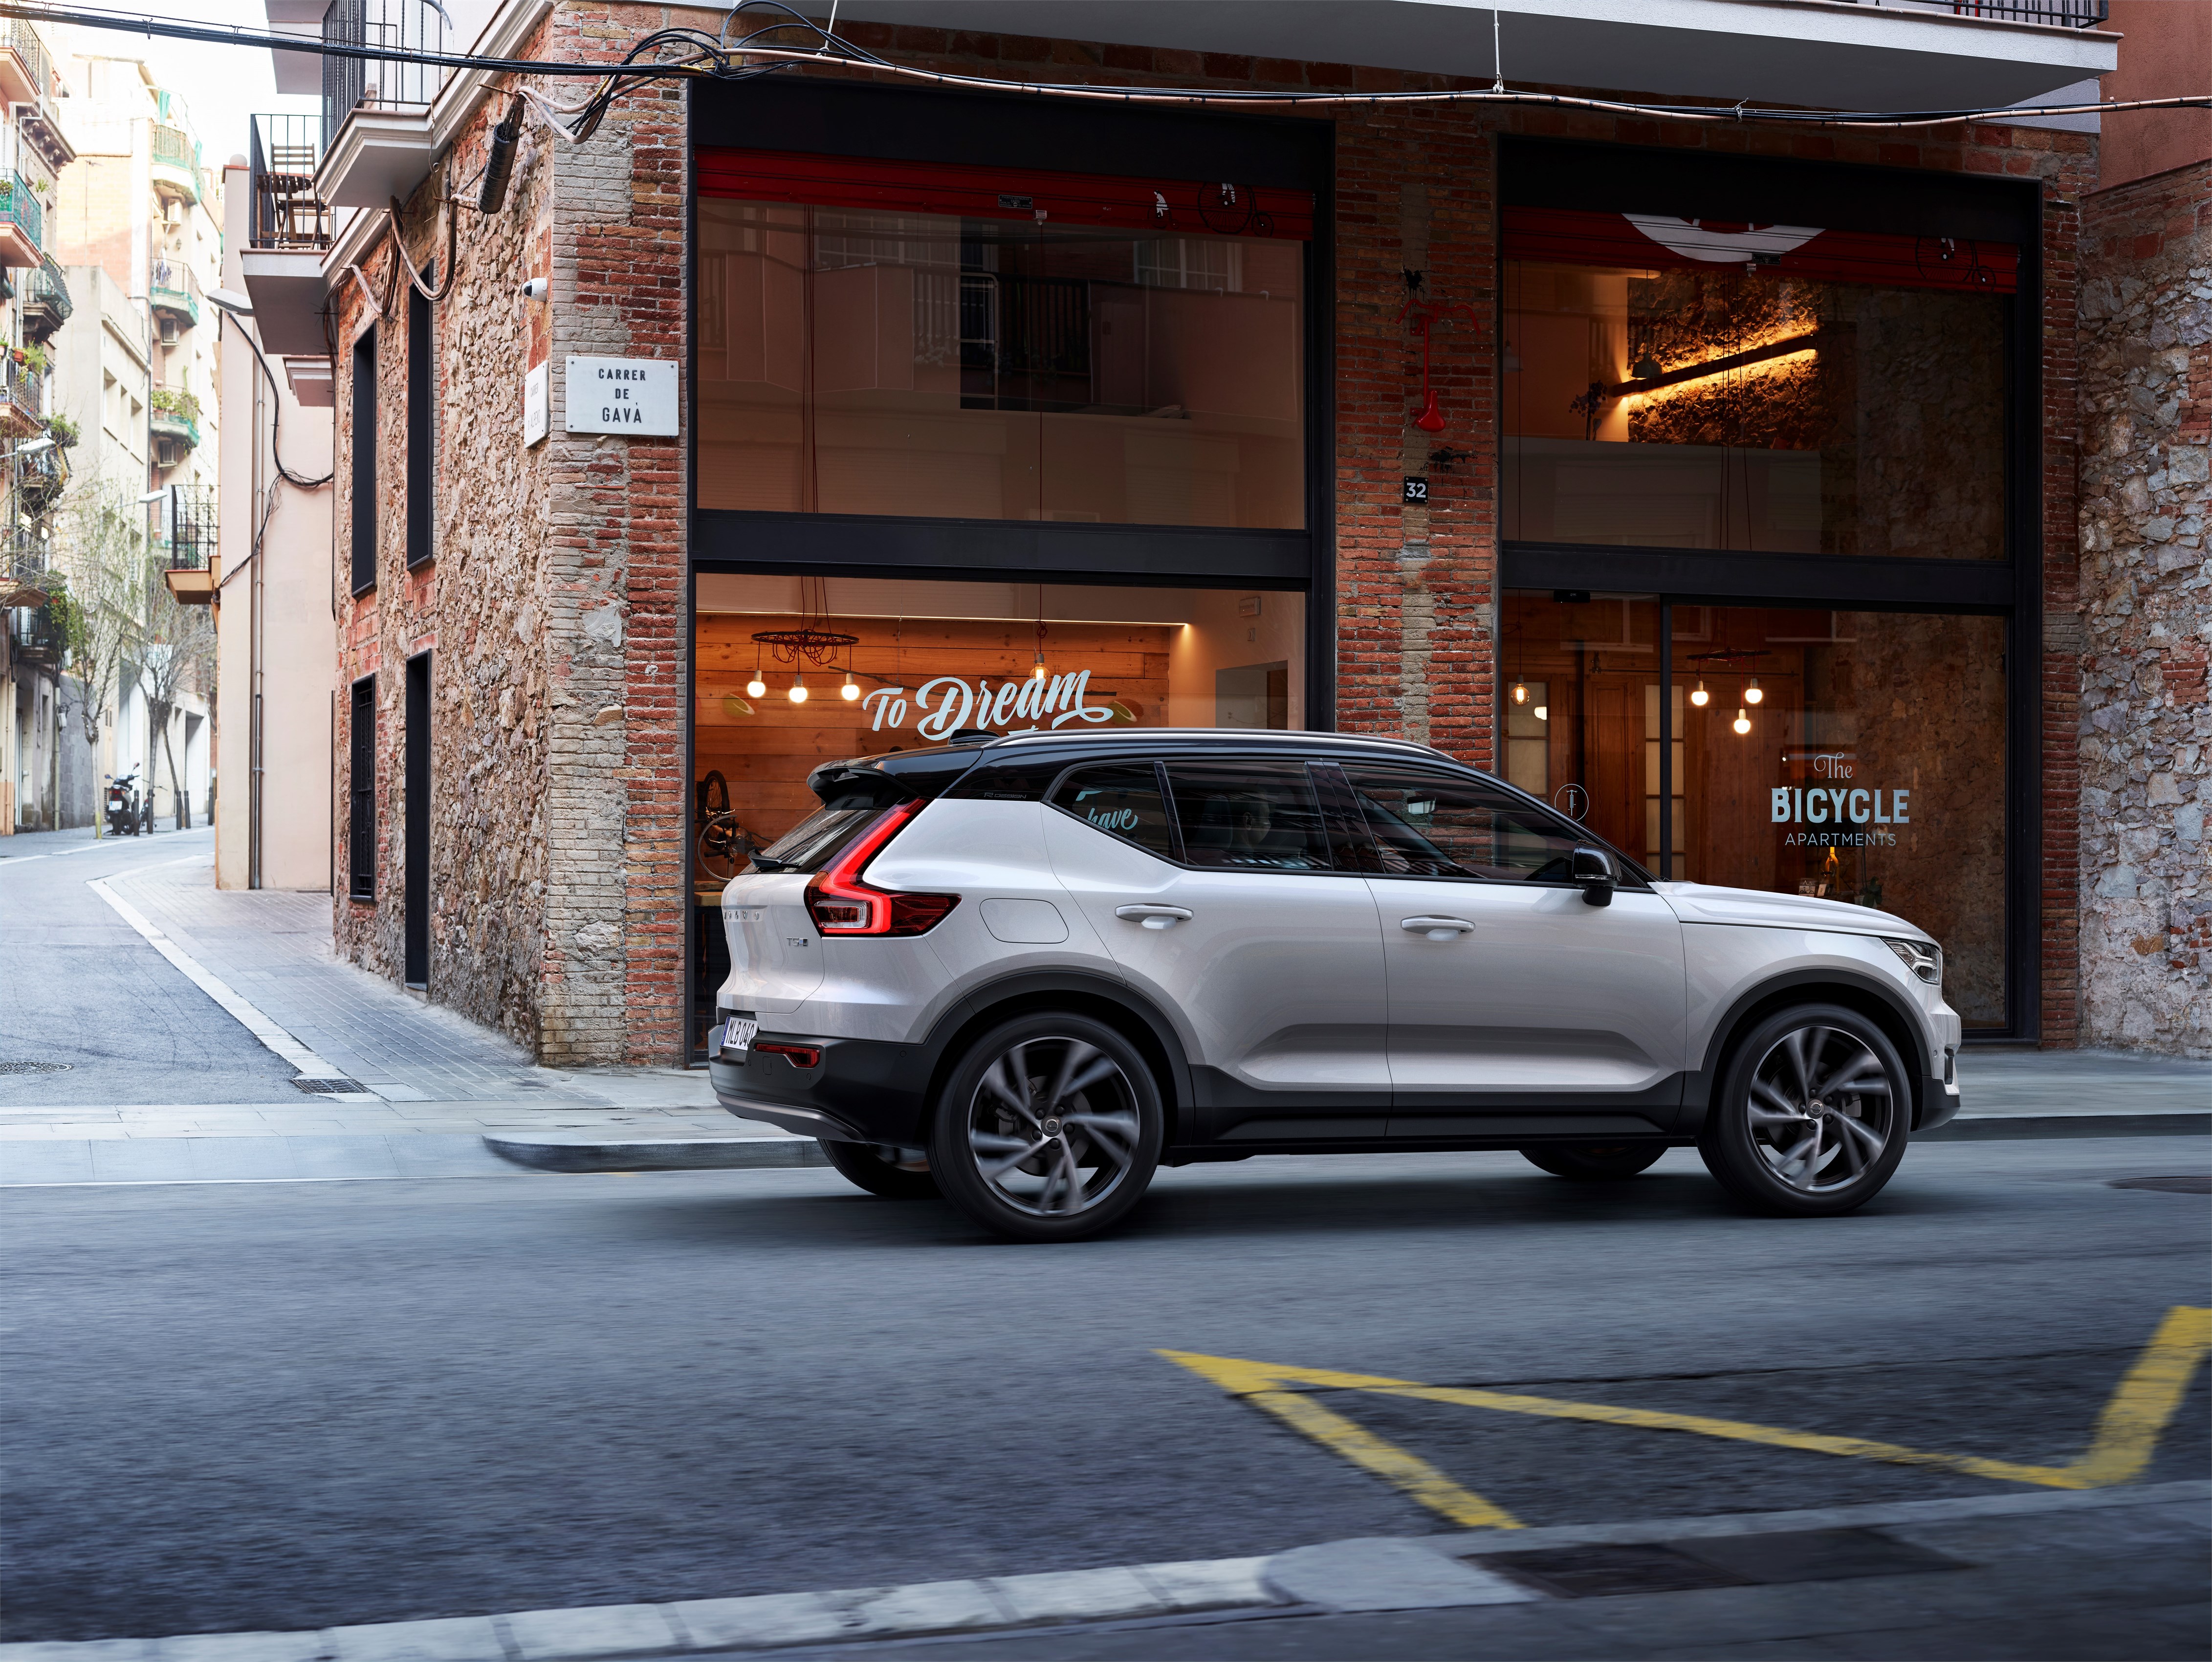 New XC40 completes global Volvo line-up for fast-growing premium SUV segment